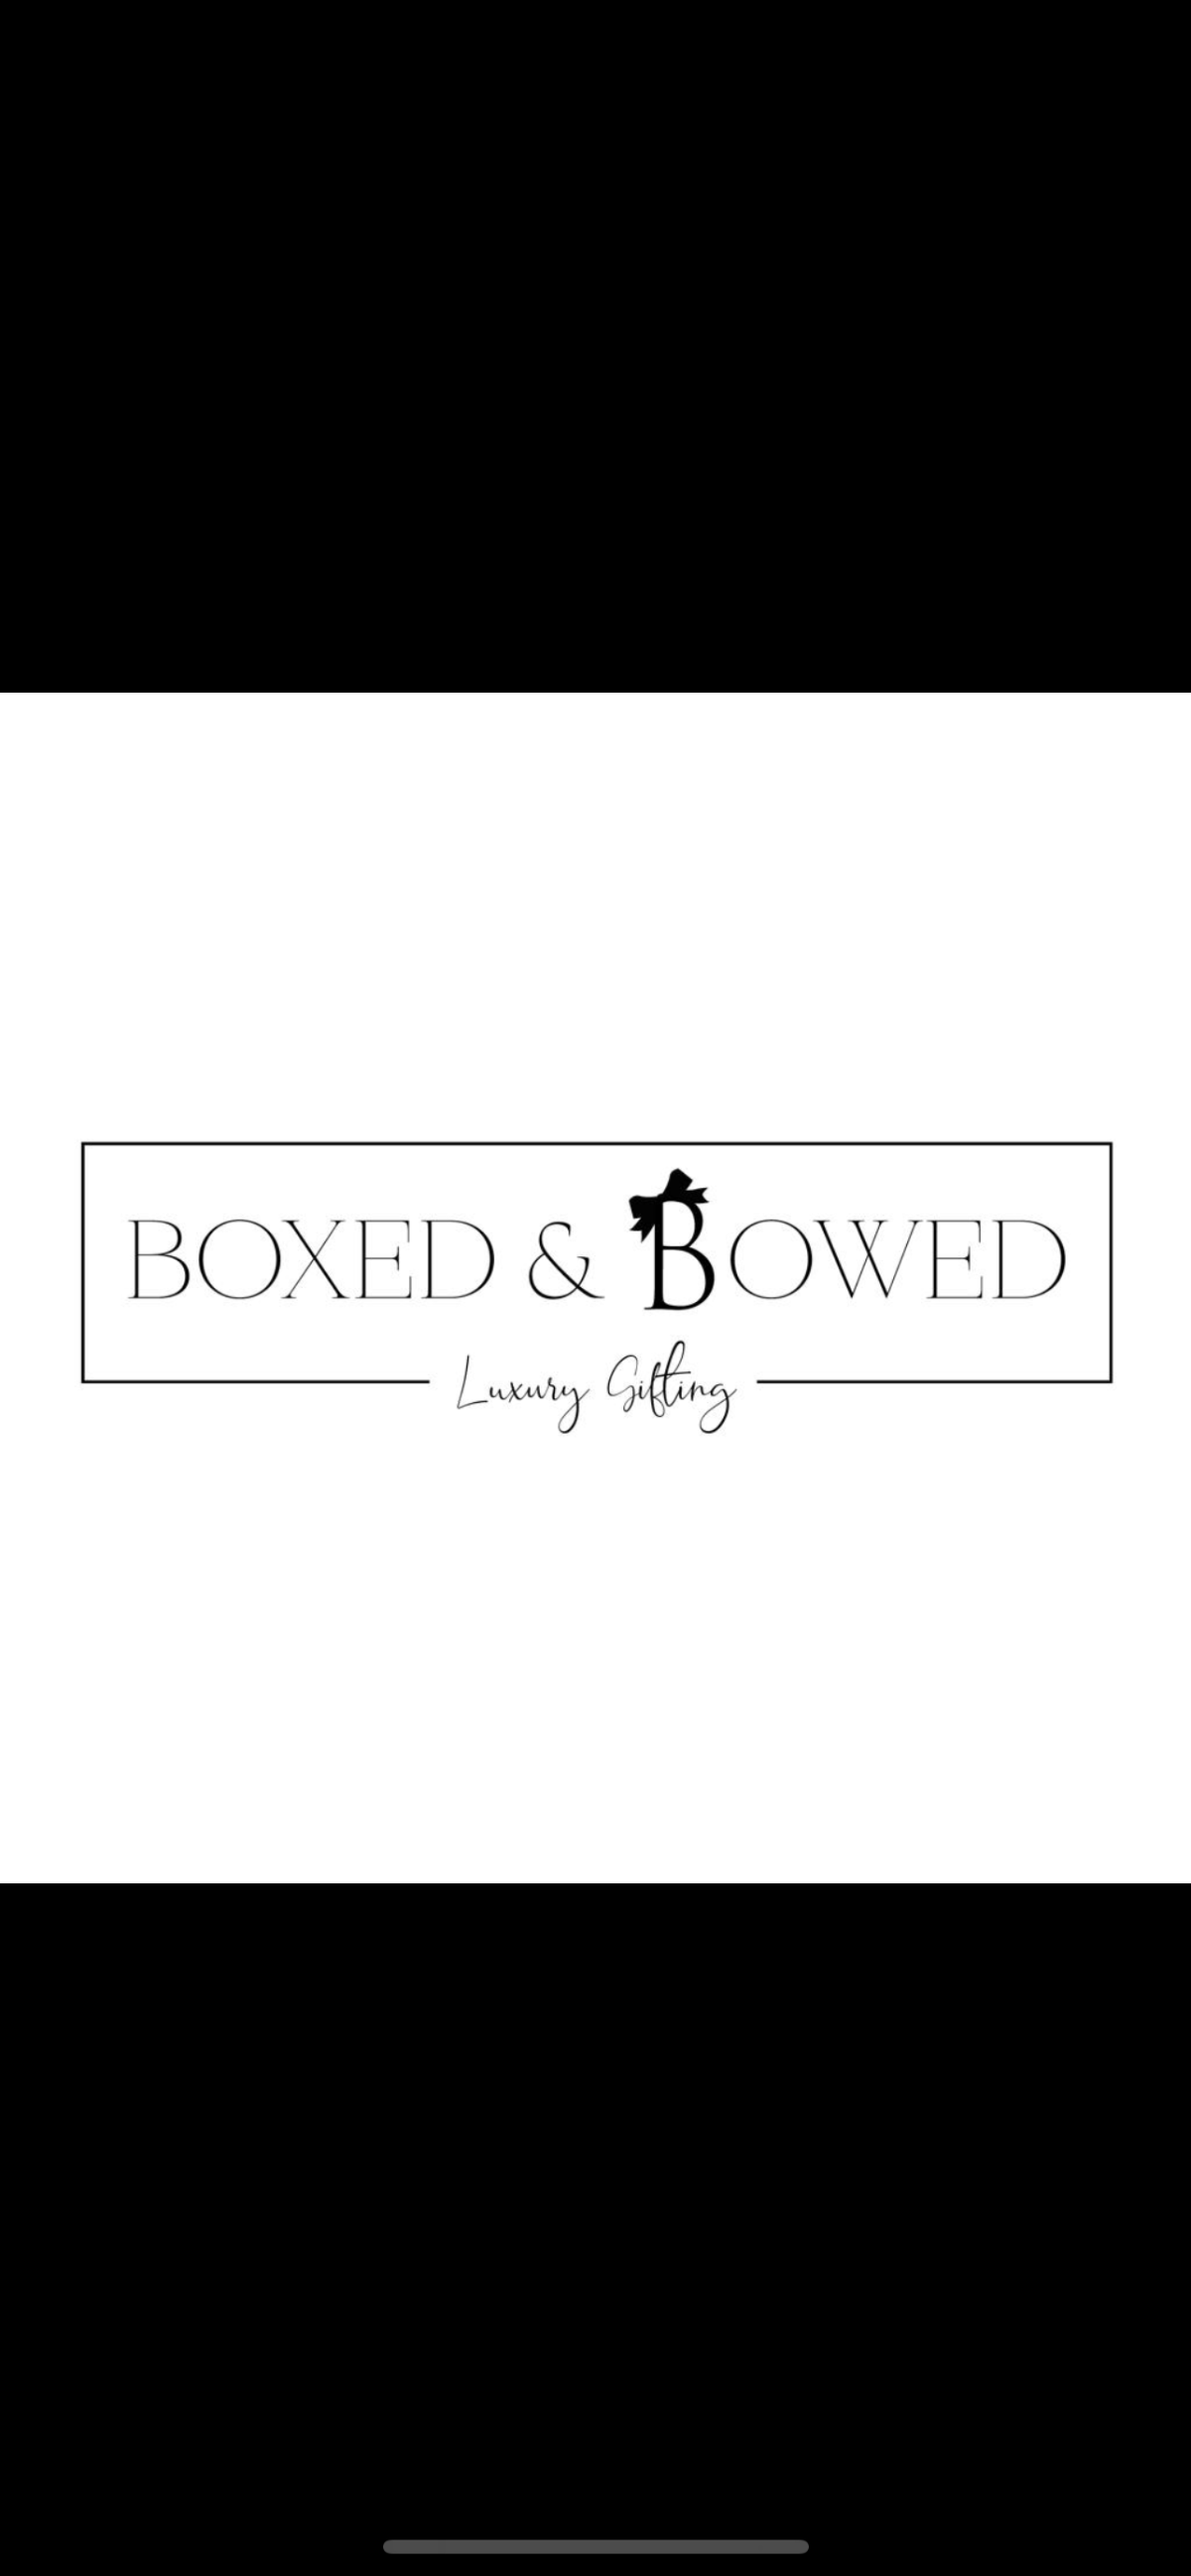 Boxed and Bowed-Image-4